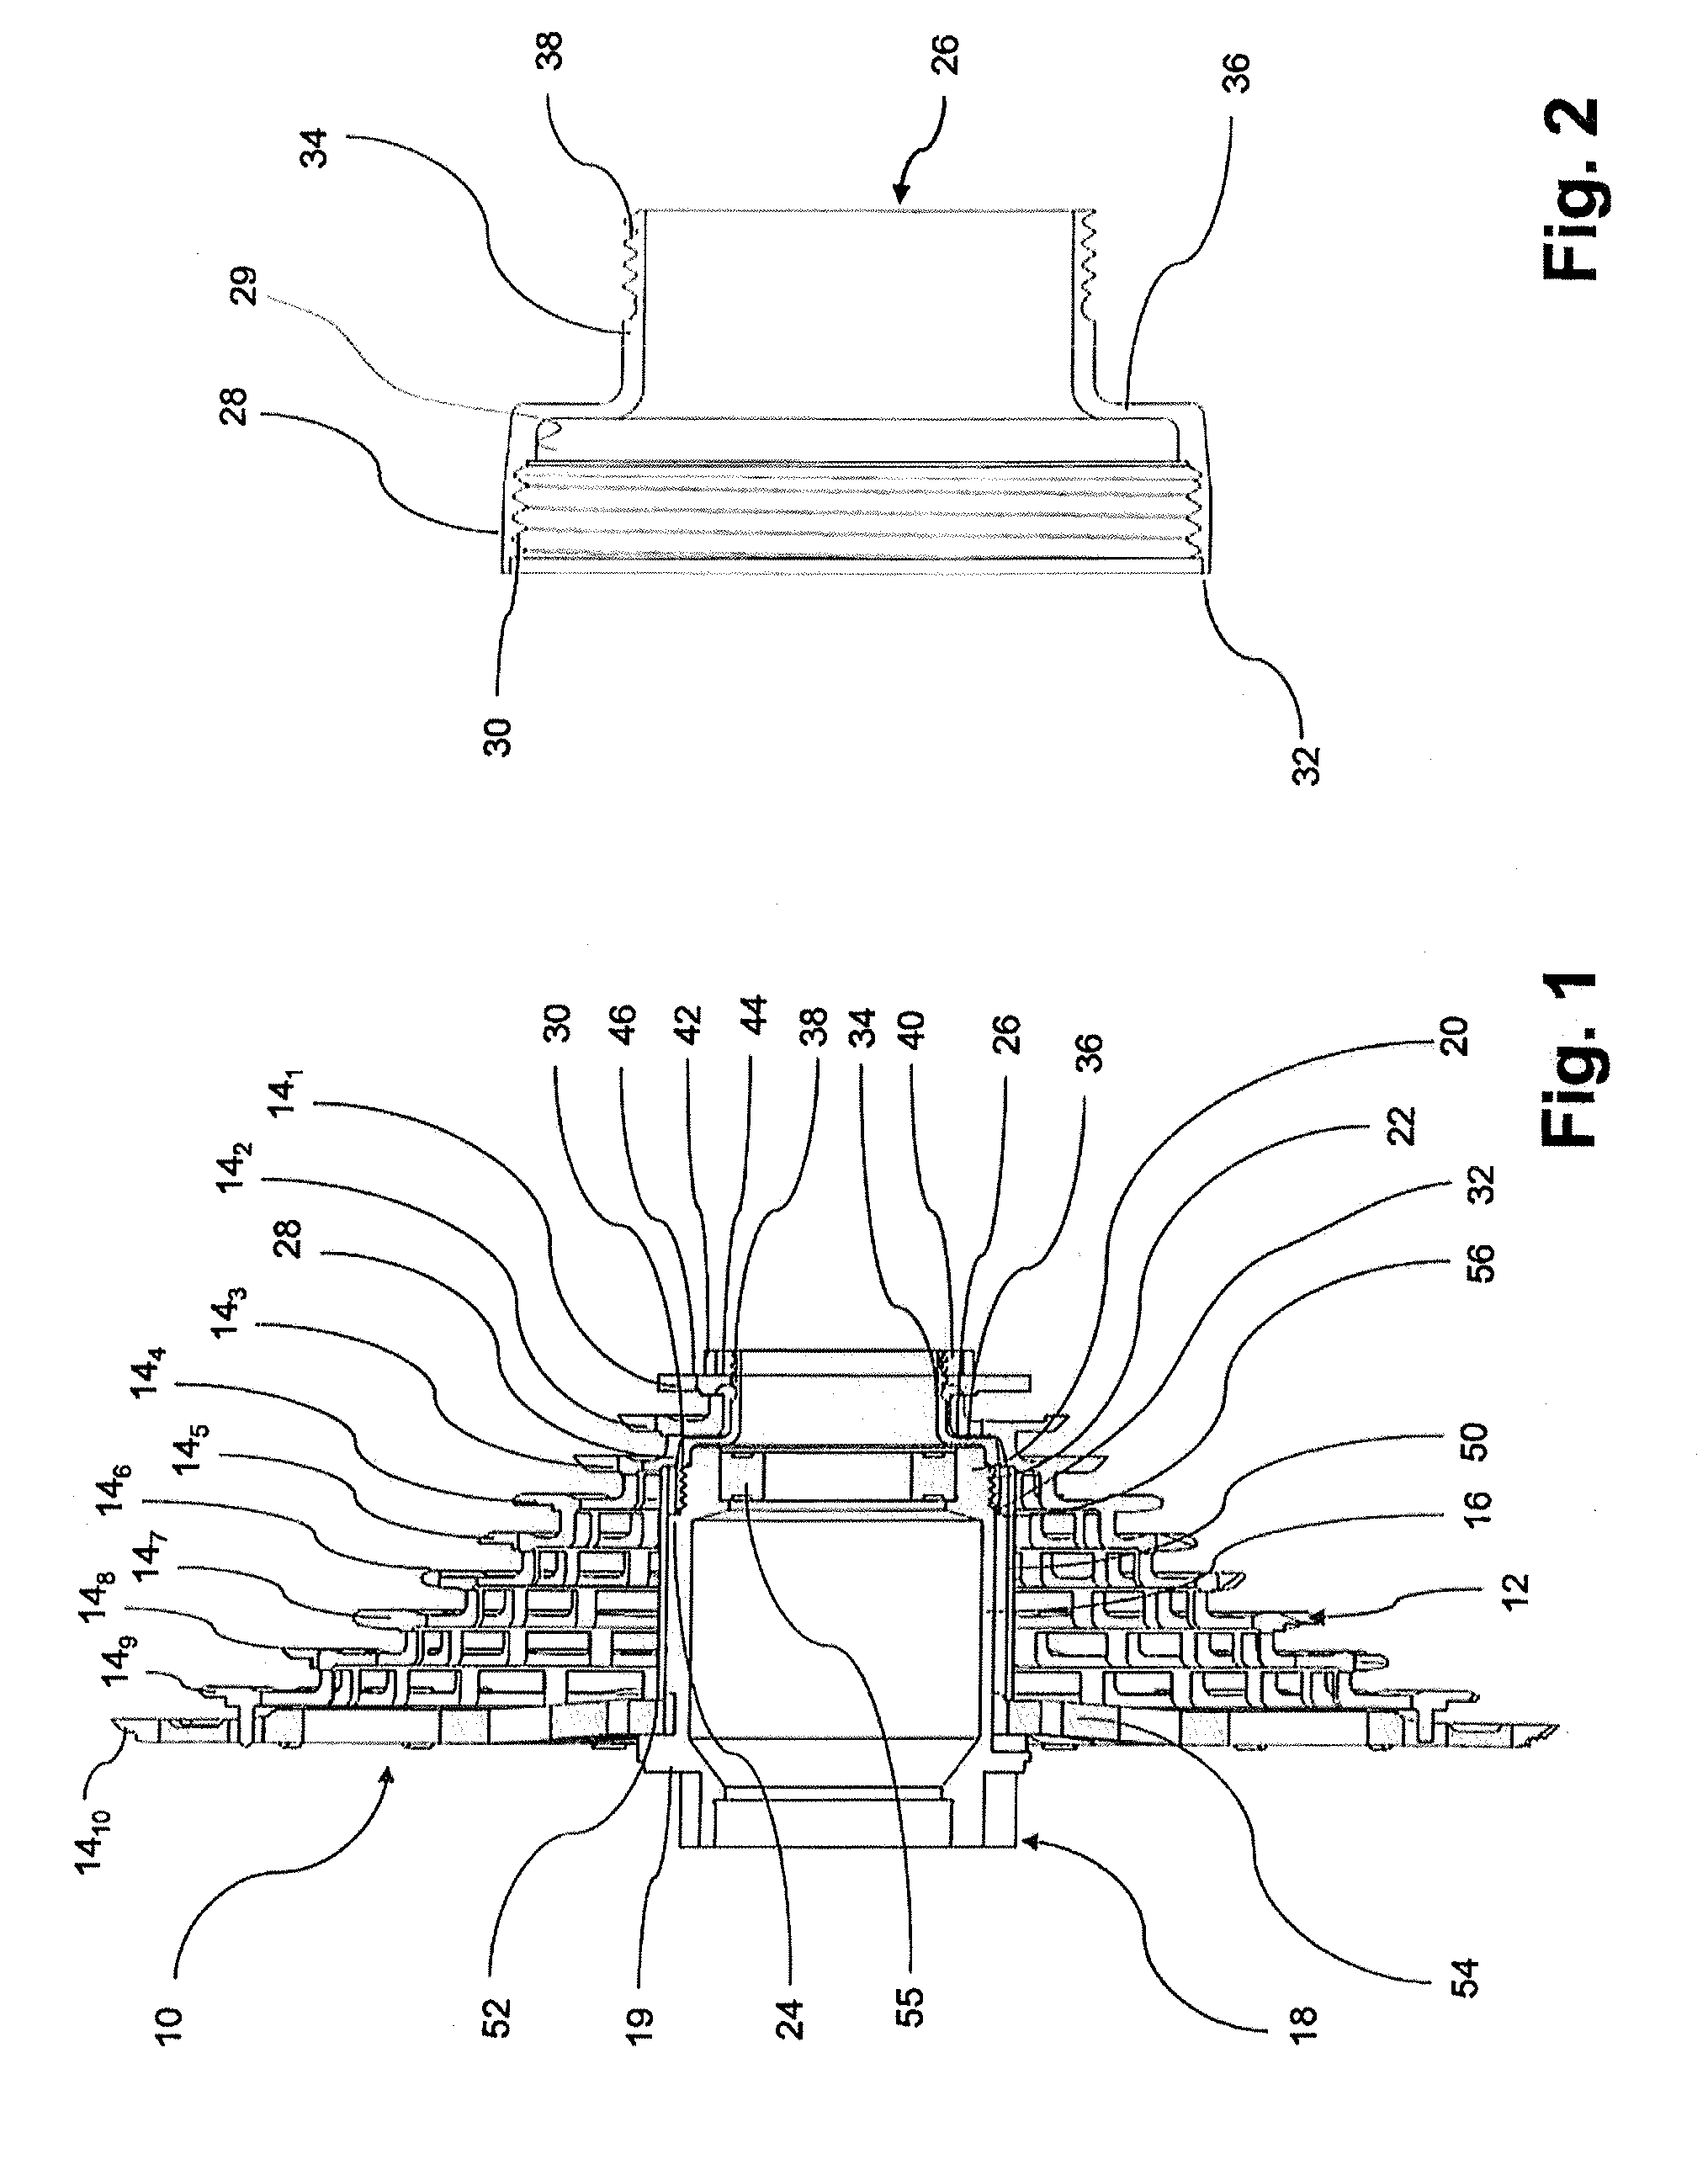 Driver for Mounting a Multiple Sprocket Arrangement to a Bicycle Rear Axle Arrangement